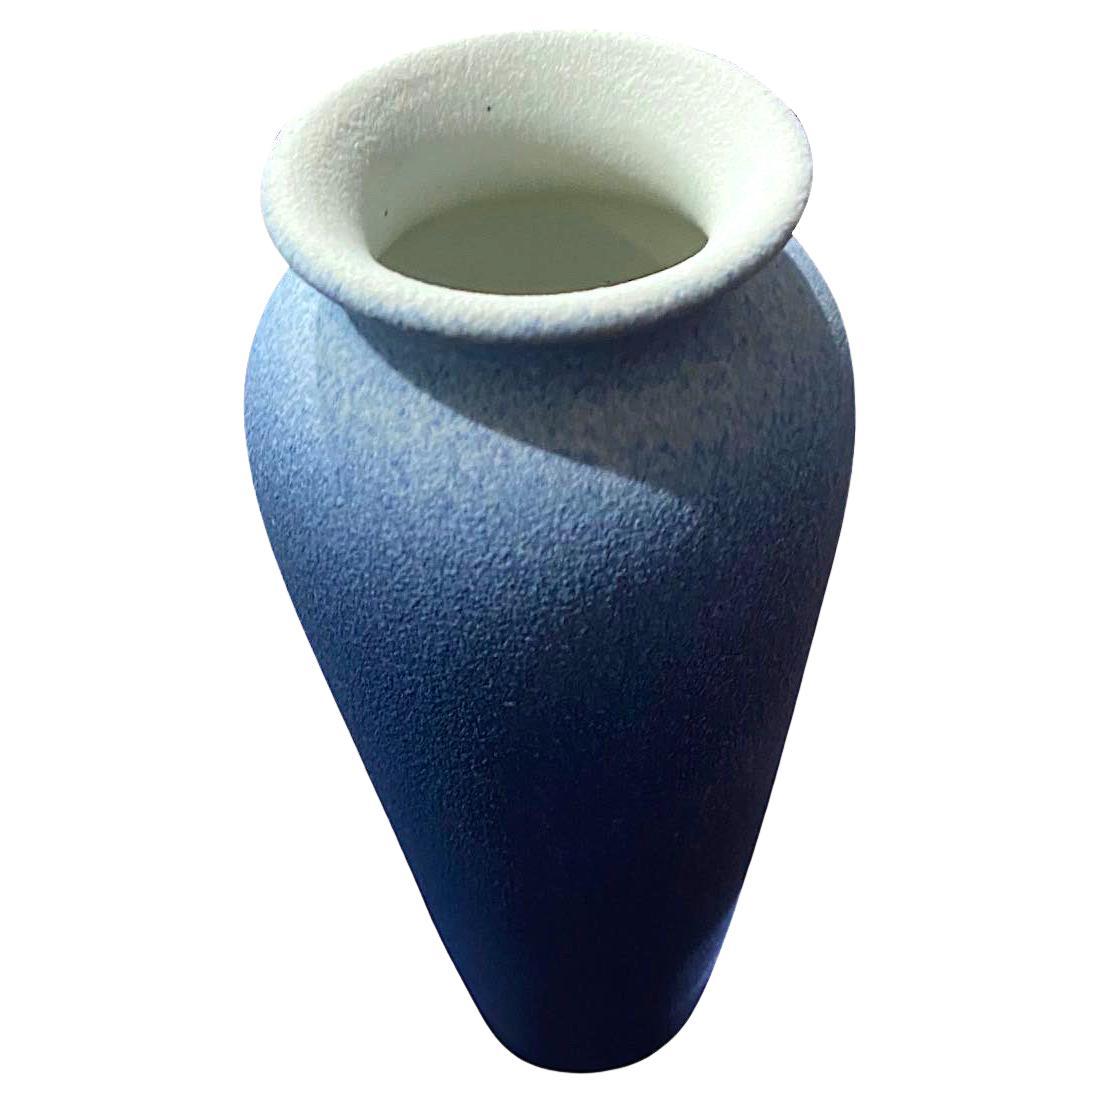 Contemporary Chinese ombre blue glazed vase.
Tall rounded top with a wide spout opening.
Part of a large collection.